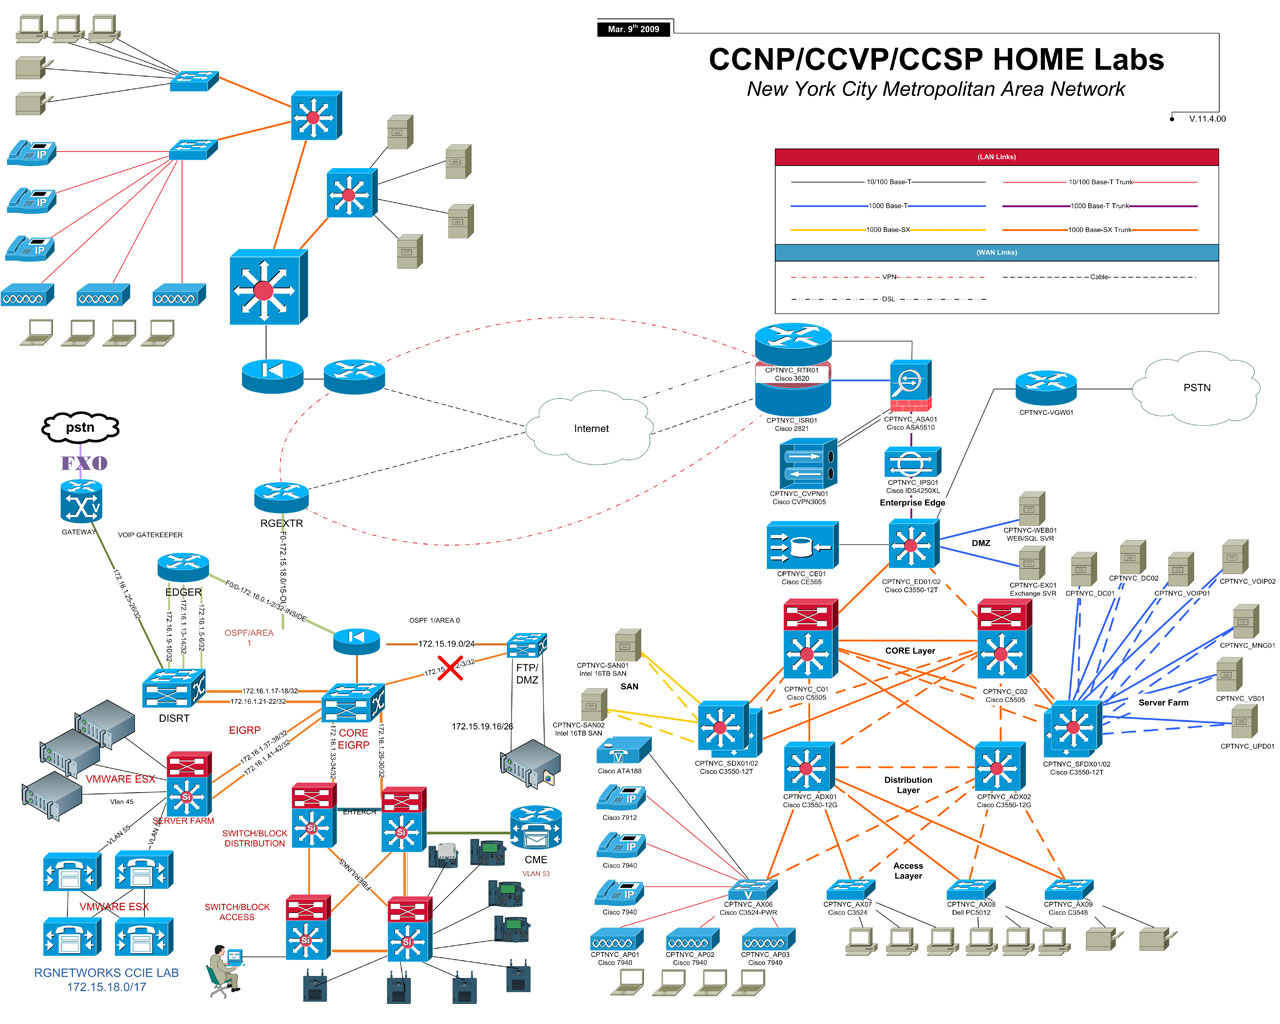 1280x1024 network diagrams highly rated - Network Drawing.